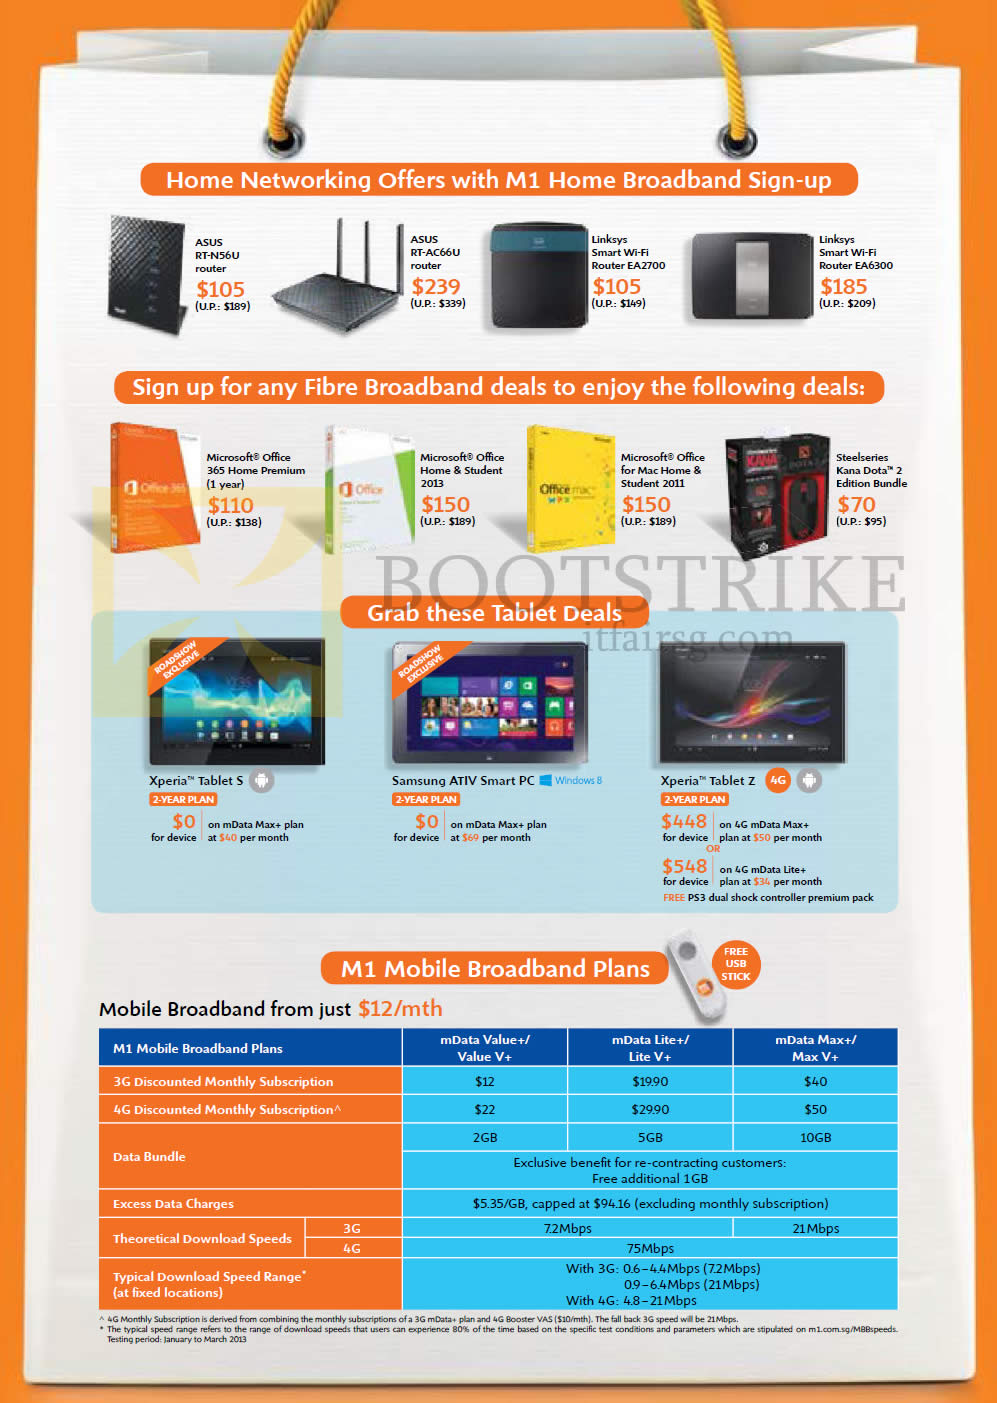 PC SHOW 2013 price list image brochure of M1 Tablets Sony Xperia Tablet S, Samsung ATIV Smart PC, Sony Xperia Tablet Z, ASUS Routers RT, Linksys, Microsoft Office 365, MData Plans